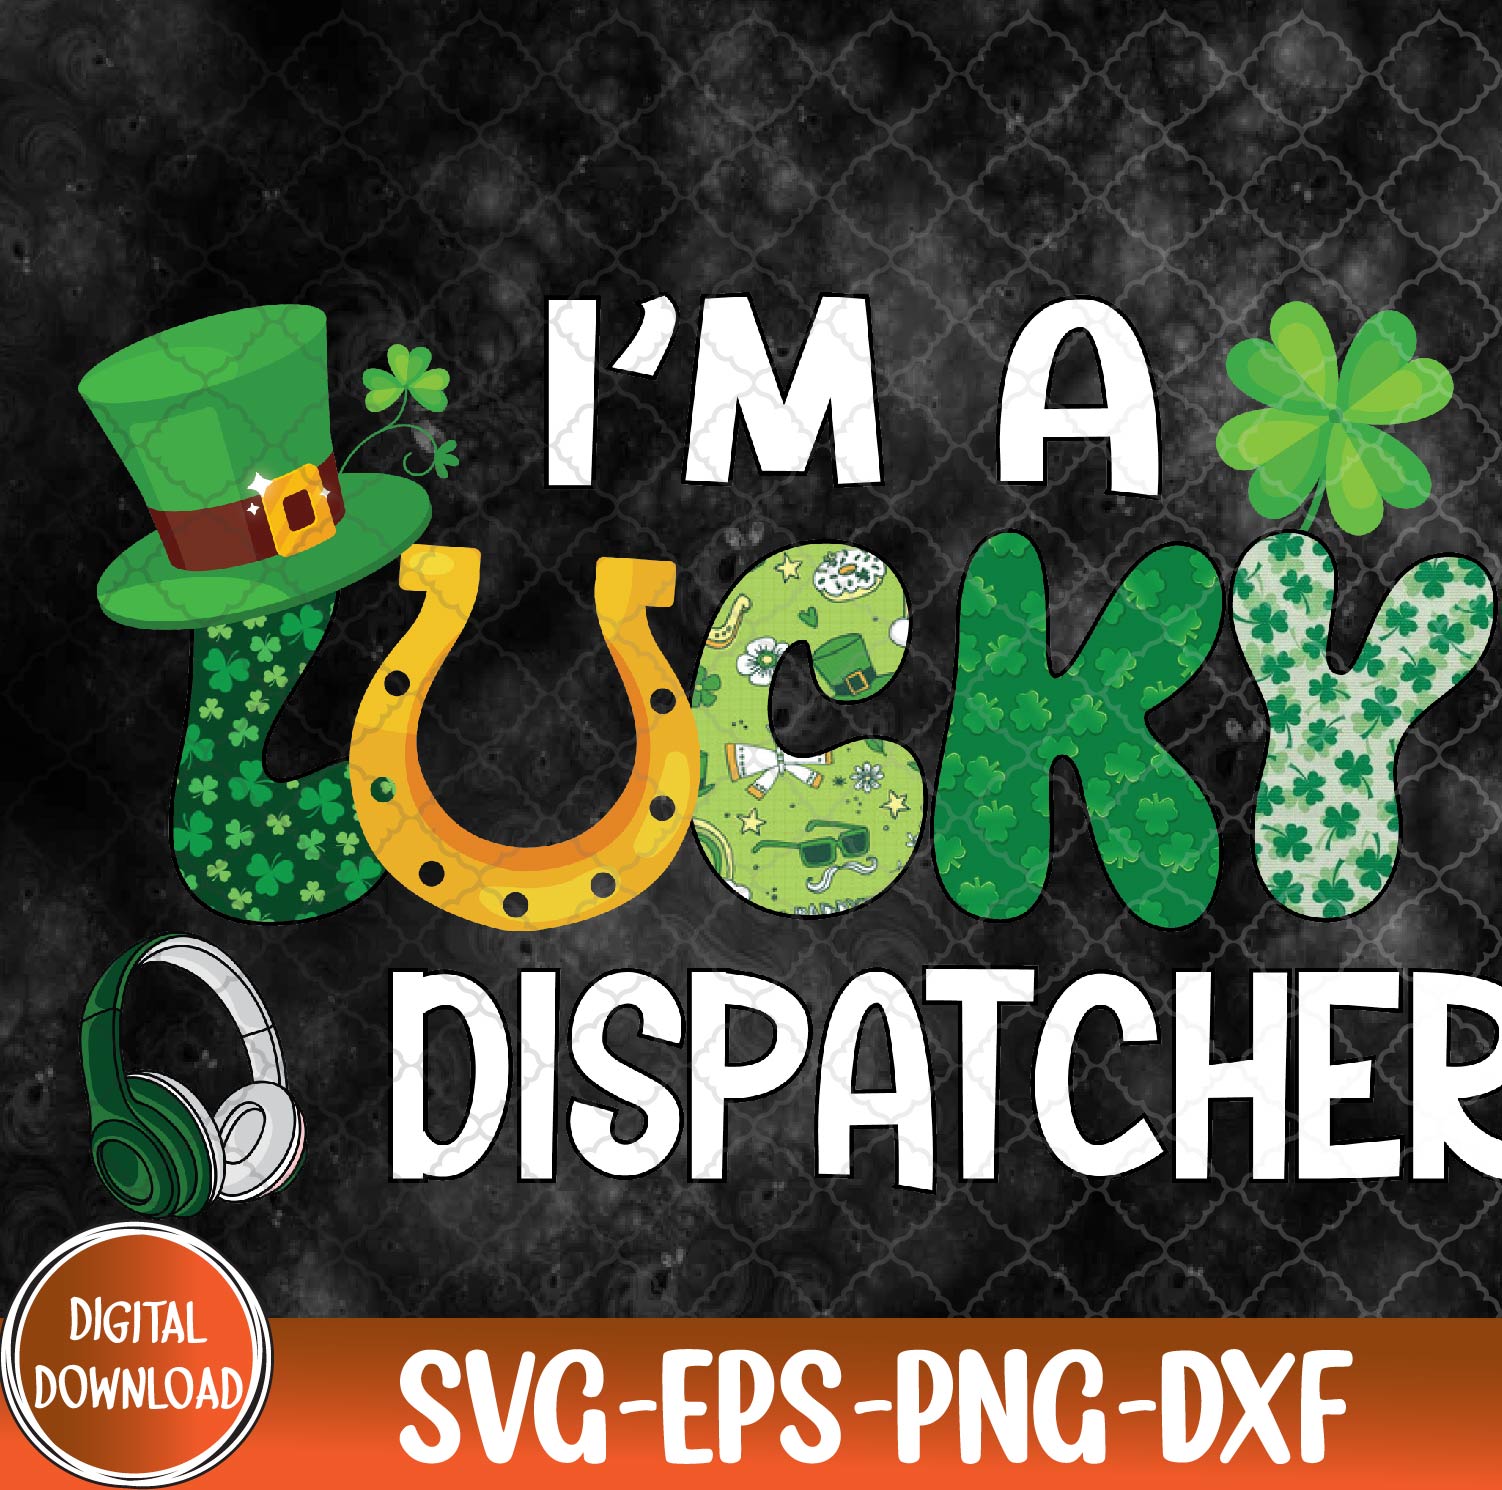 WTMNEW9file 09 23 Lucky Dispatcher St. Patrick's Day Clovers Costume Job Team Svg, Eps, Png, Dxf